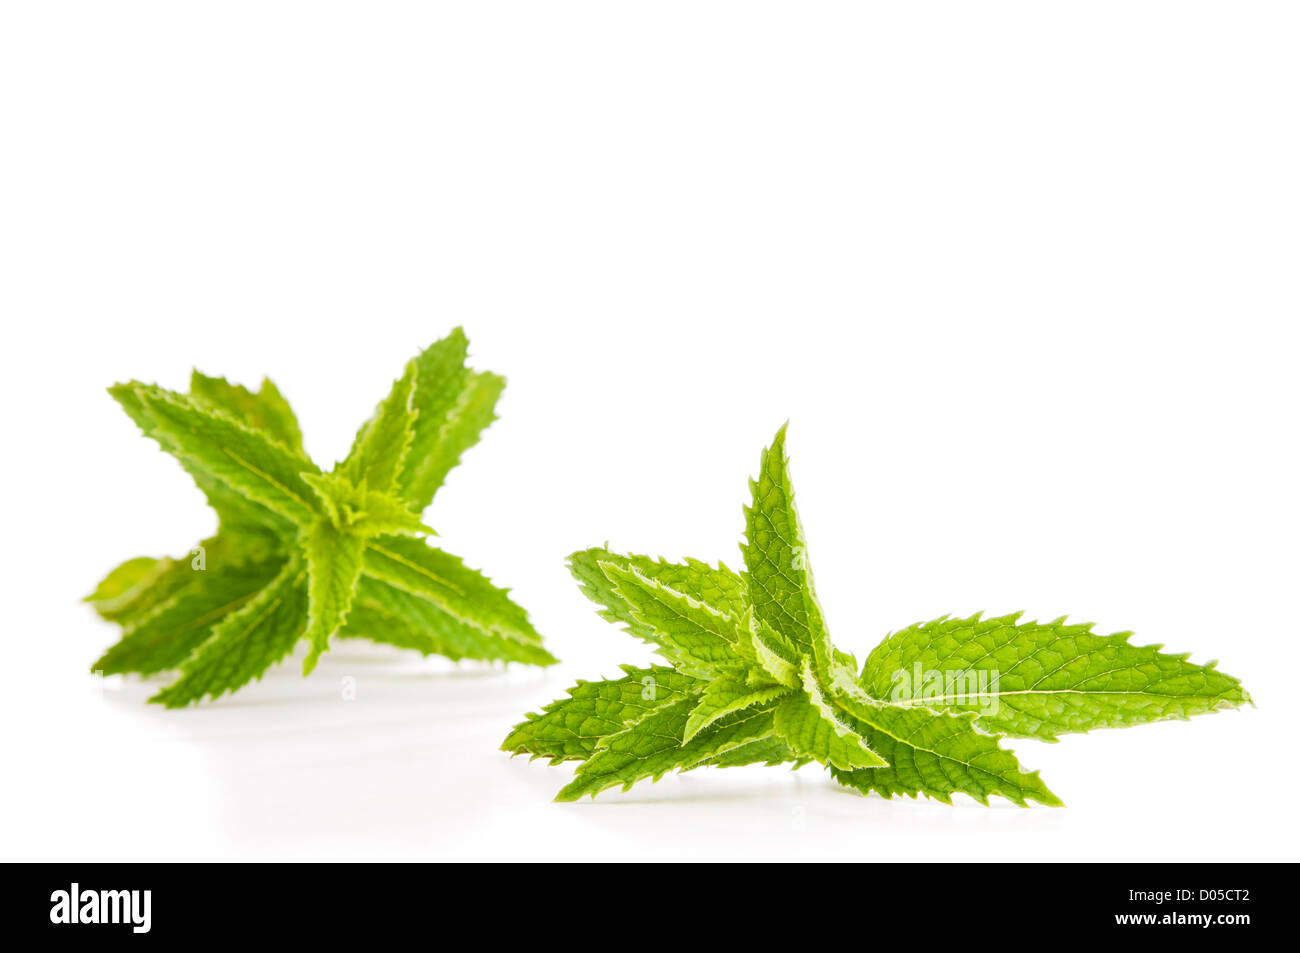 Mint leaves isolated on white in fresh, vibrant green Stock Photo